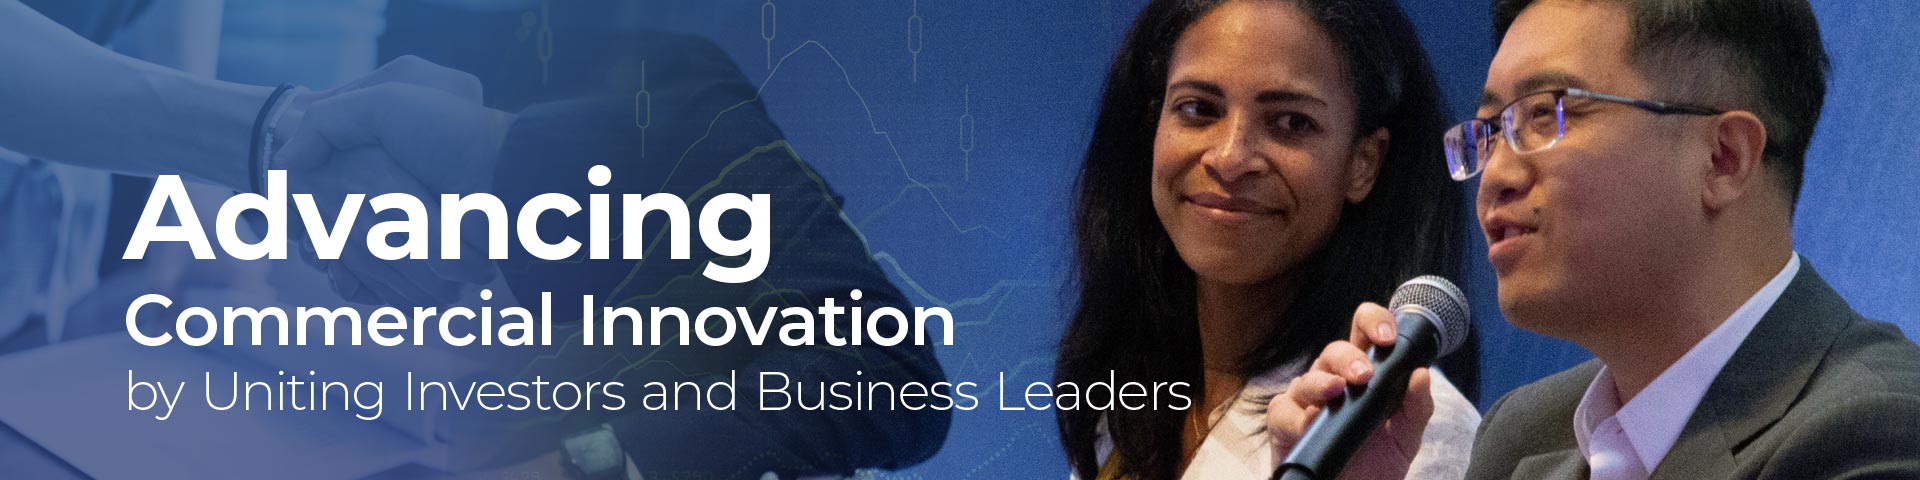 Advancing Commercial Innovation by Uniting Investors and Business Leaders